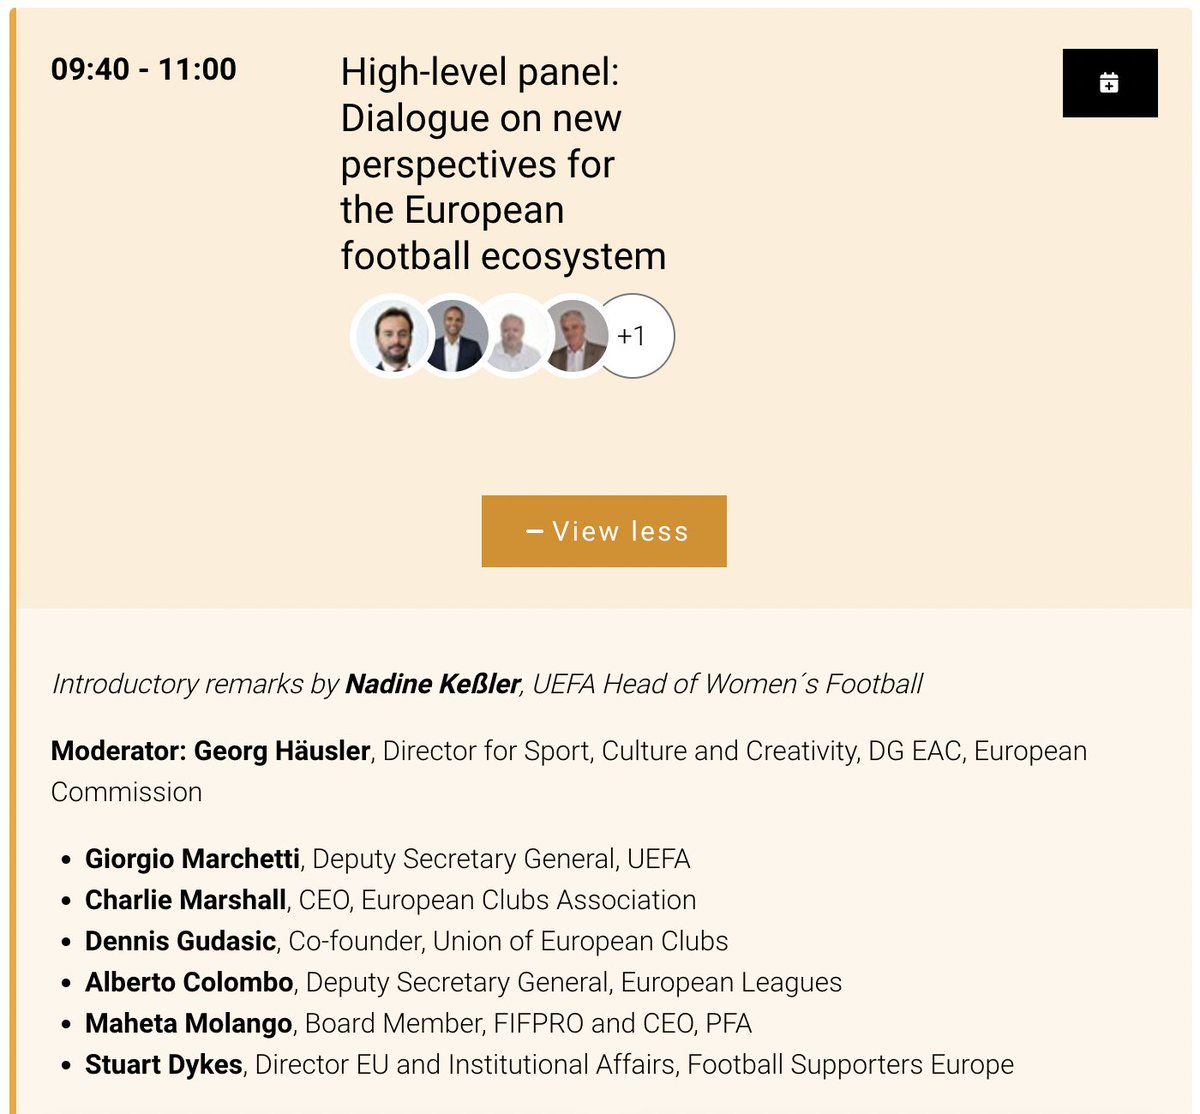 The UEC's path to stakeholder recognition continues to develop as an organisation closely aligned with the key goals and values promoted by the @EU_Commission. Our co-founder and Executive Board member @DGudasic will be proud to represent the UEC and its members in the panel